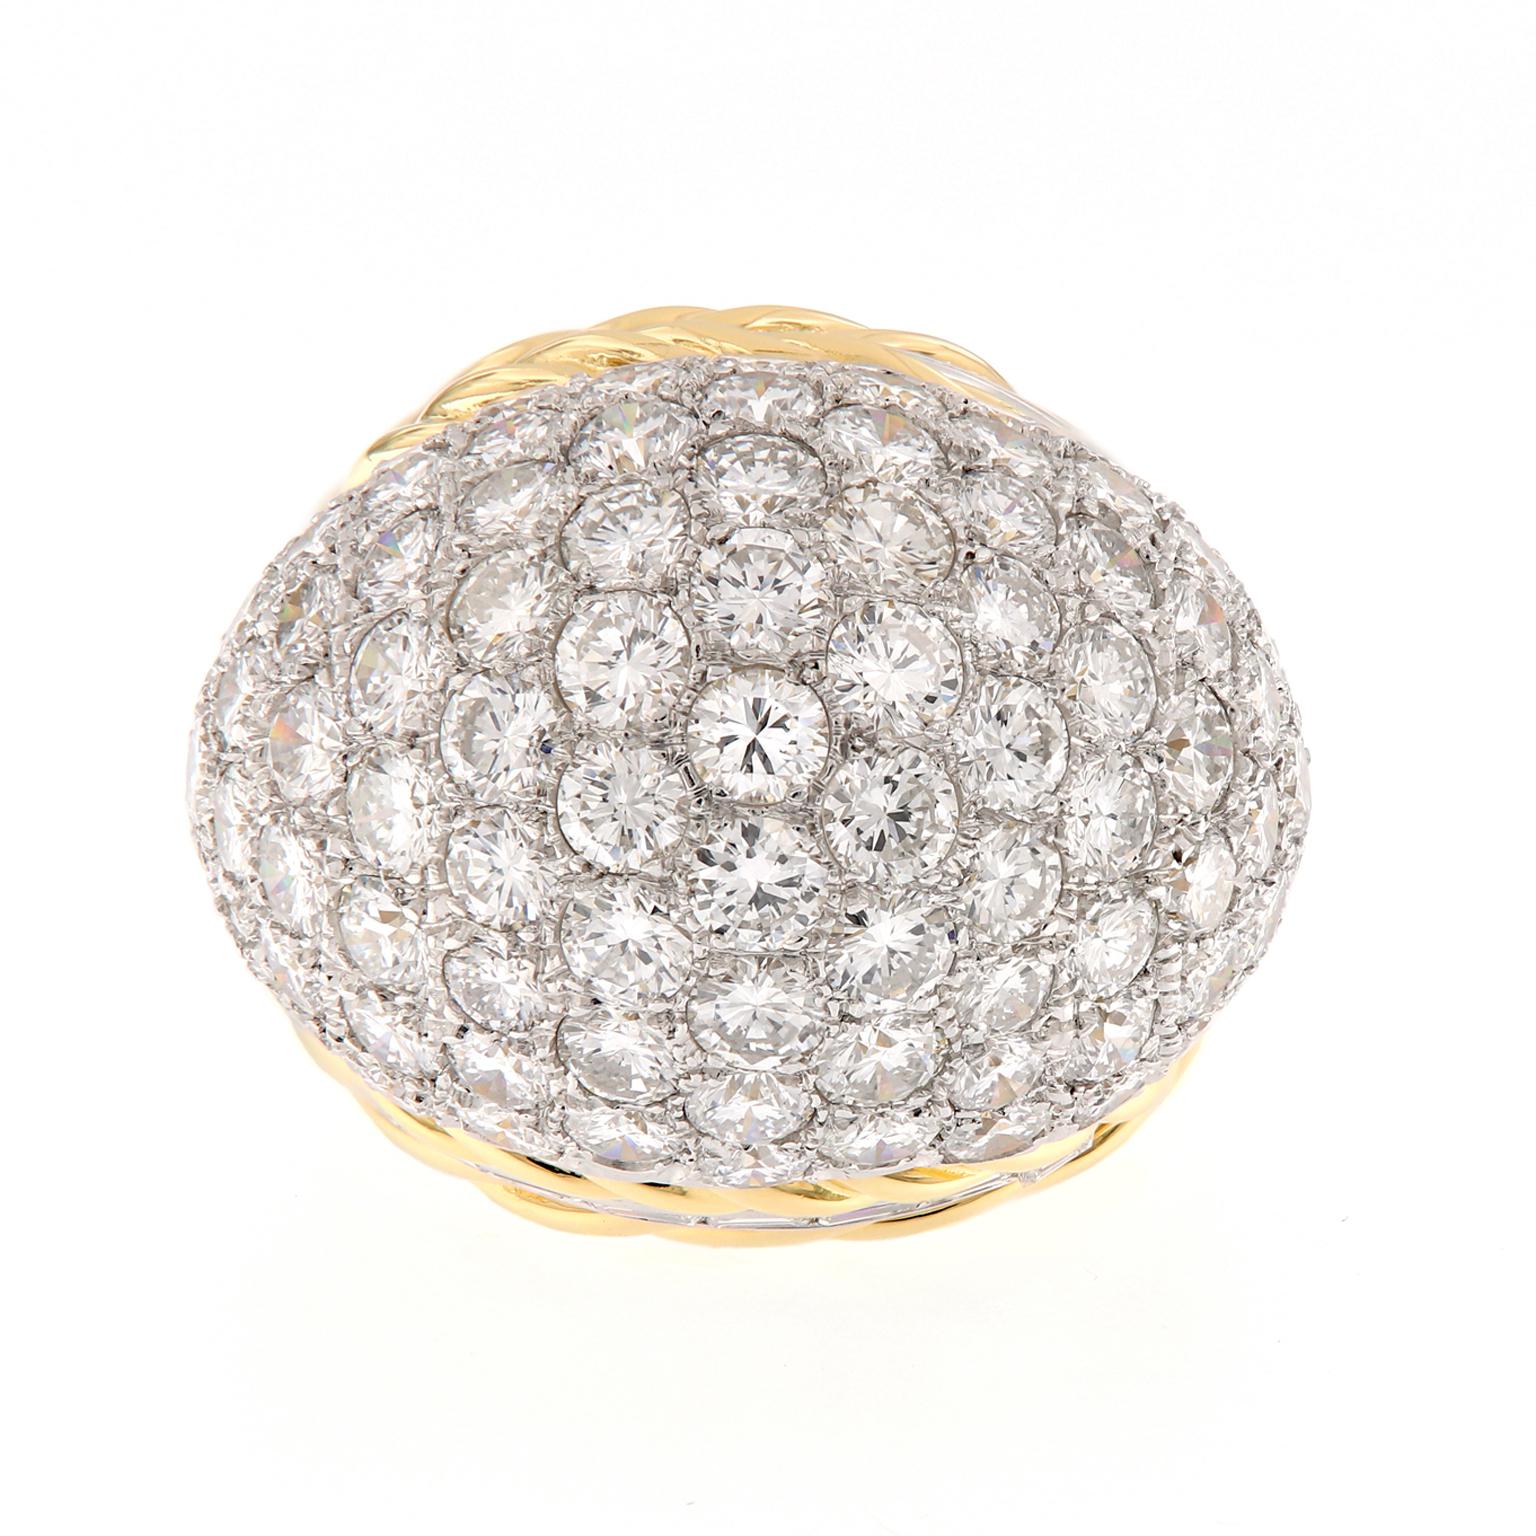 This epic estate ring is as fun as it is important. This beautifully crafted ring from Hammer Brothers of New York is truly a striking piece of jewelry. Showcasing almost eight carats of diamonds and rope design detail. The ring is crafted of